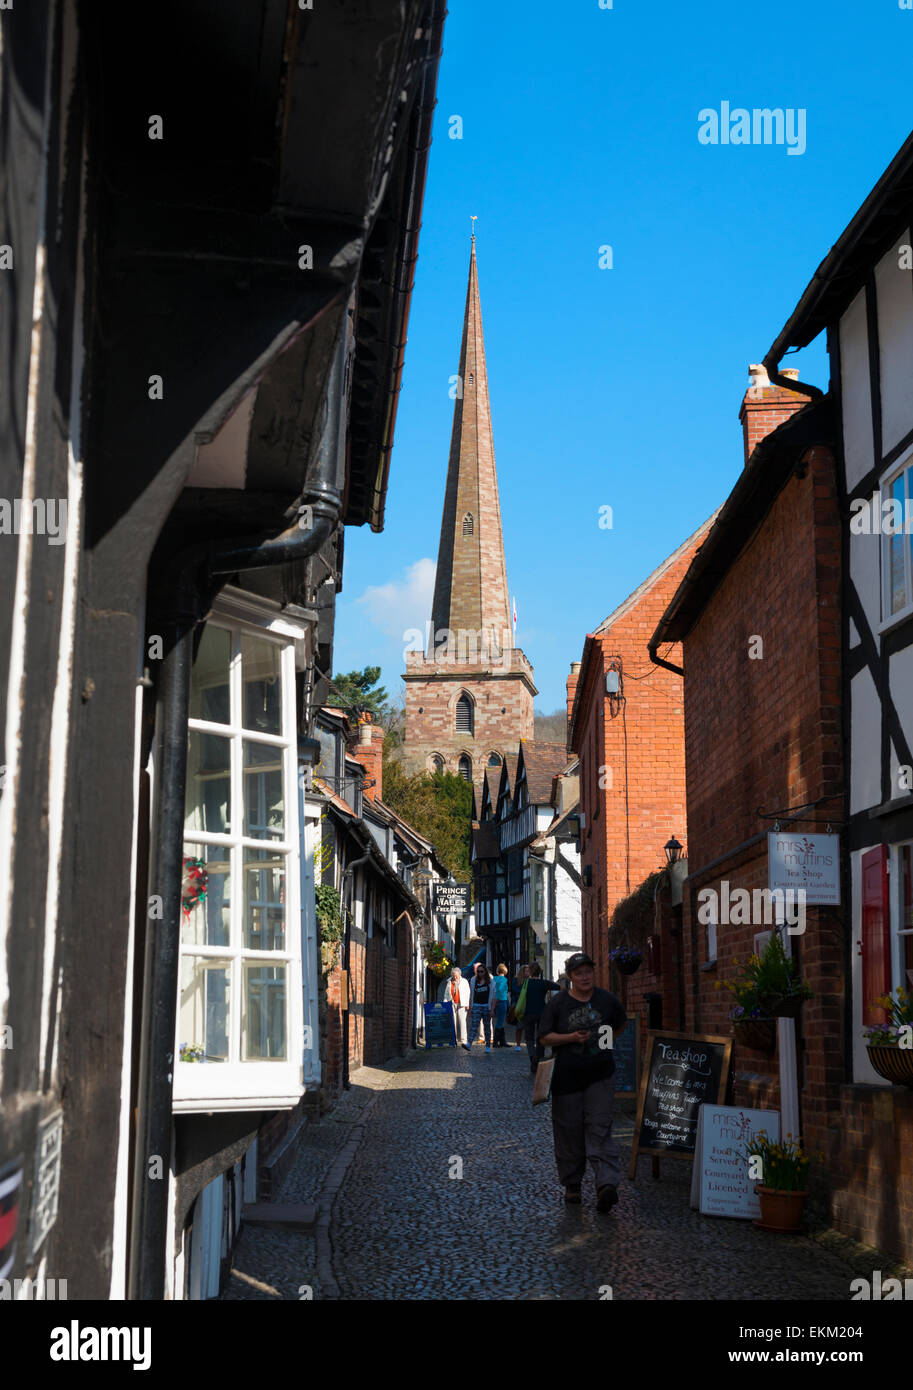 Church Lane leading to St Michael and All Angels church in Ledbury, Herefordshire, England. Stock Photo